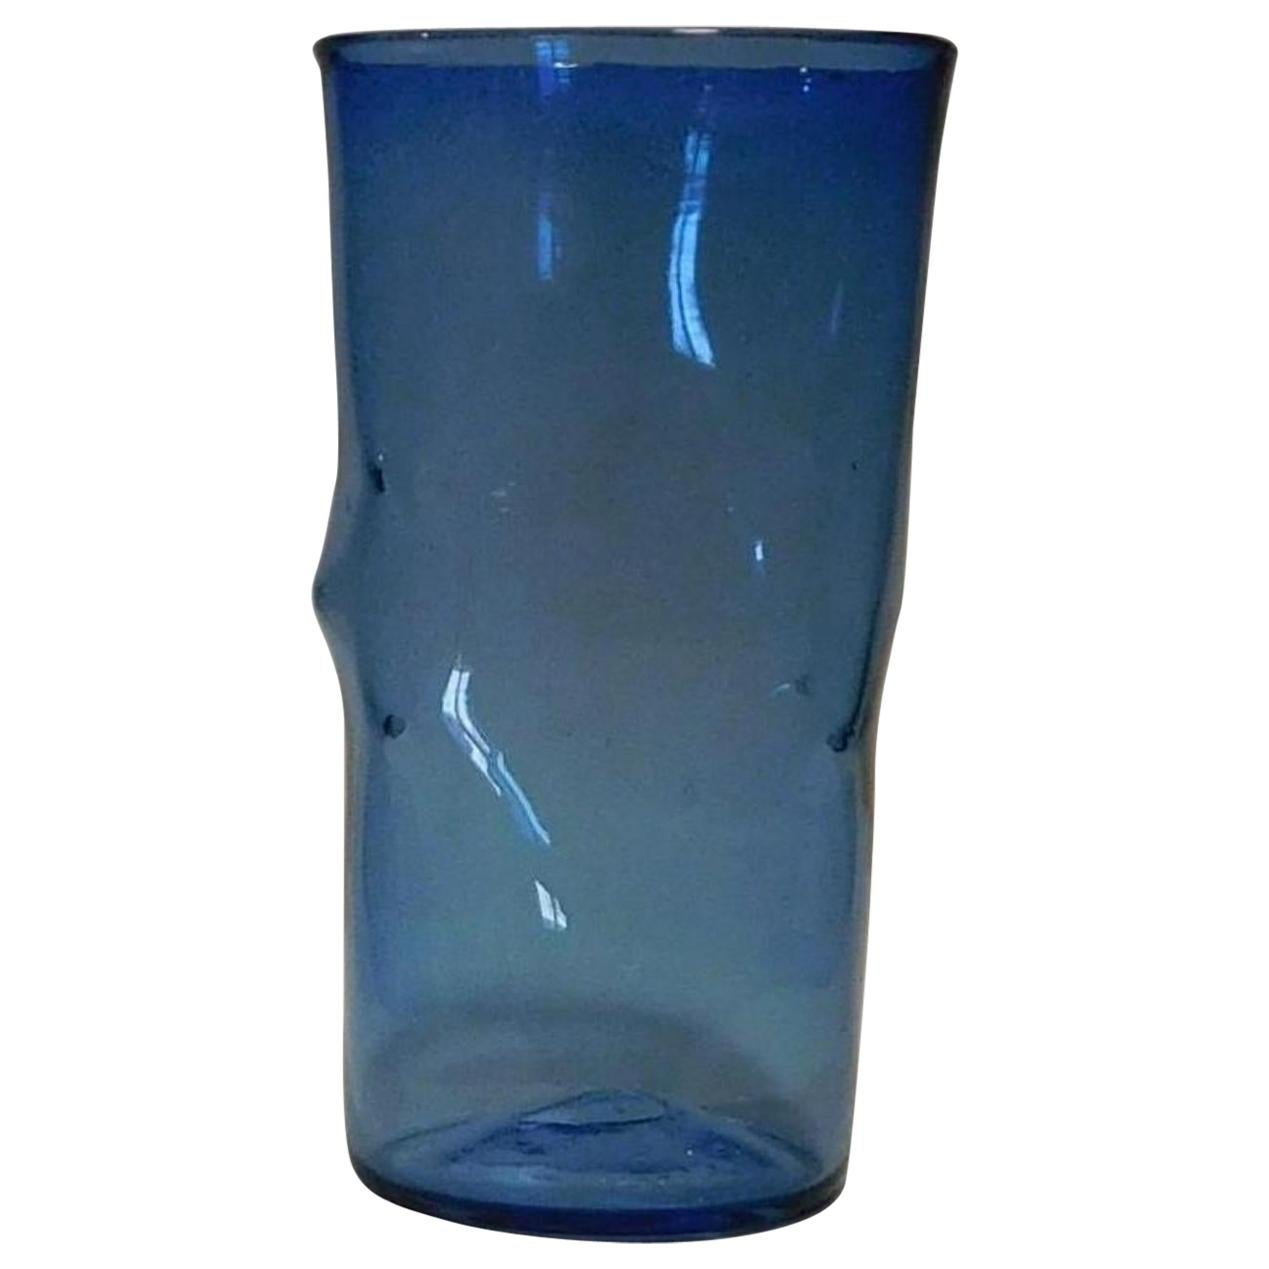 Blenko Large Pinched Vase in Bright Blue, Mint Condition